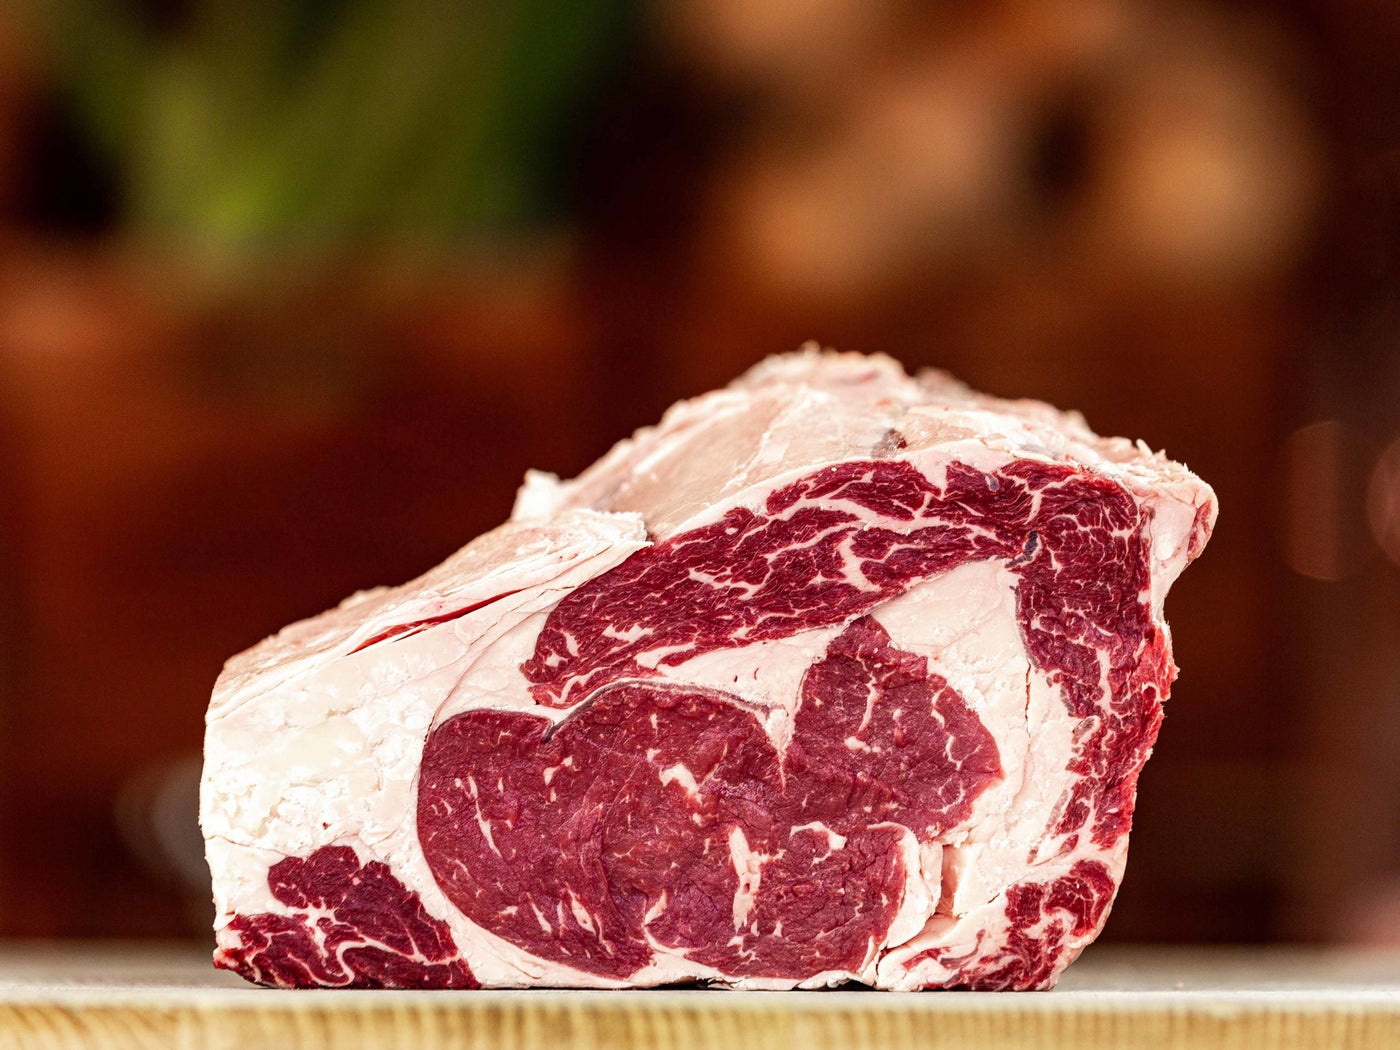 Dry-Aged Ex-Dairy Ribeye - Beef - Thomas Joseph Butchery - Ethical Dry-Aged Meat The Best Steak UK Thomas Joseph Butchery